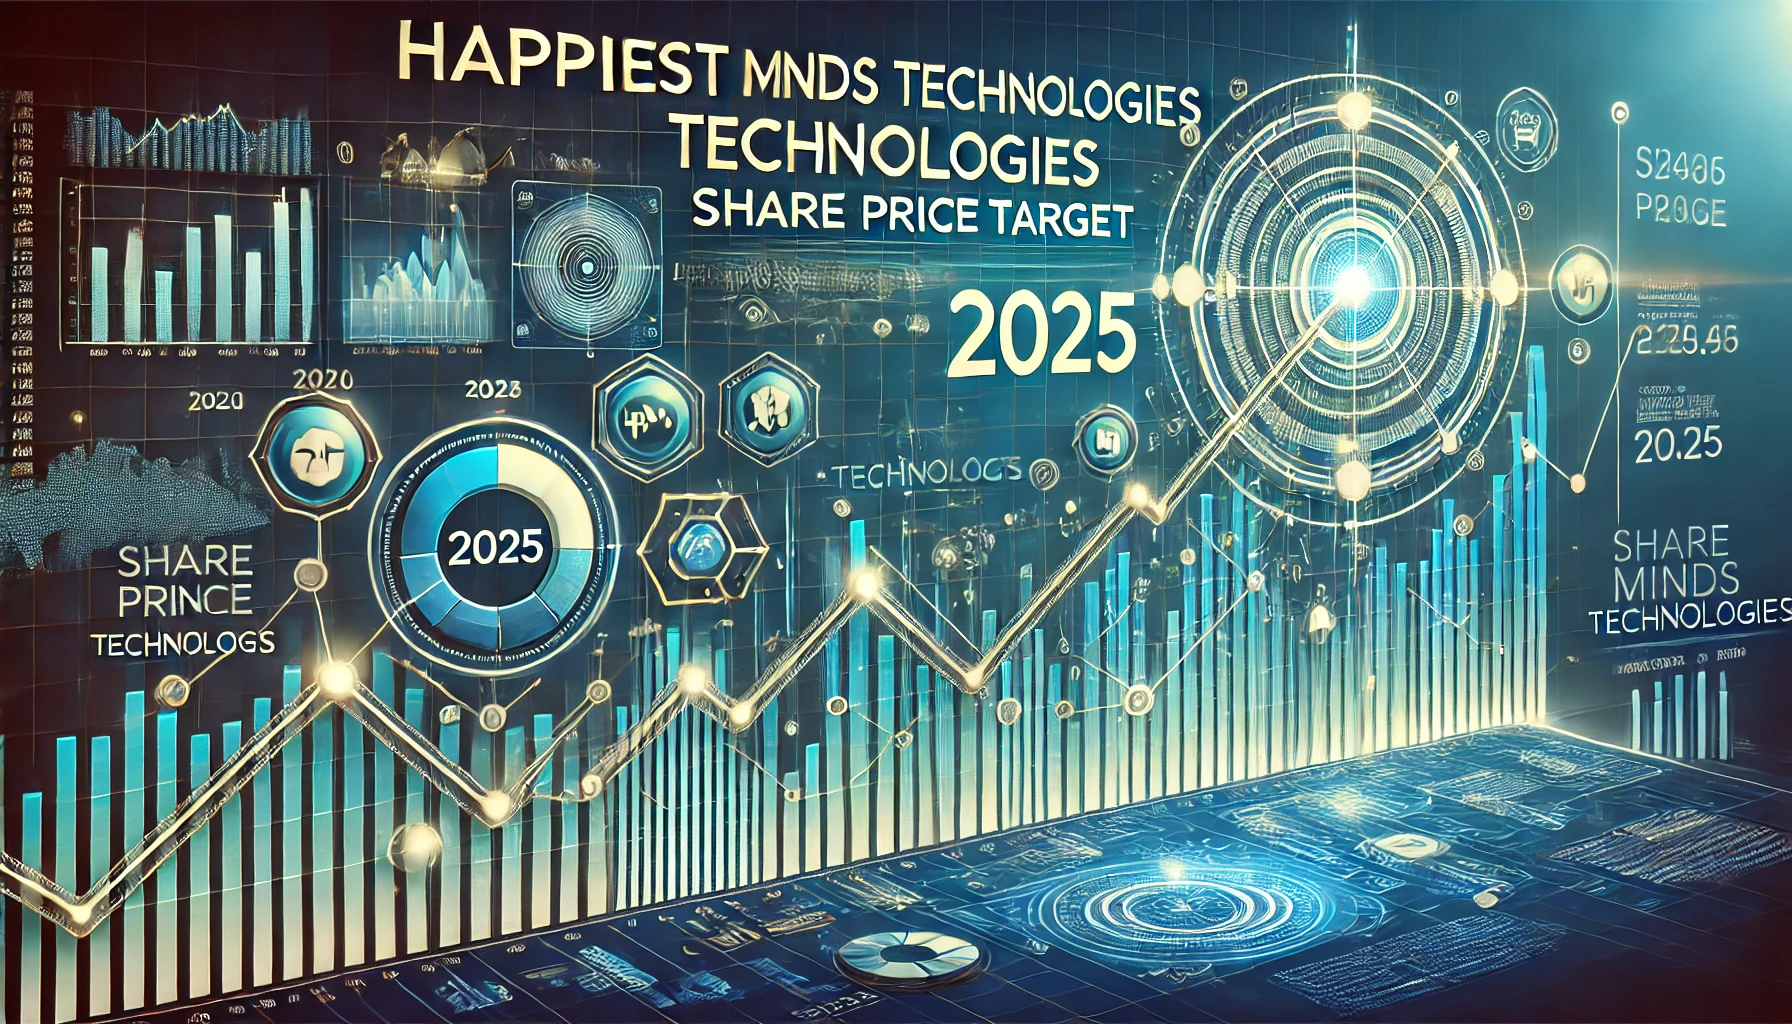 Happiest Minds Technologie Share Price Target 2025